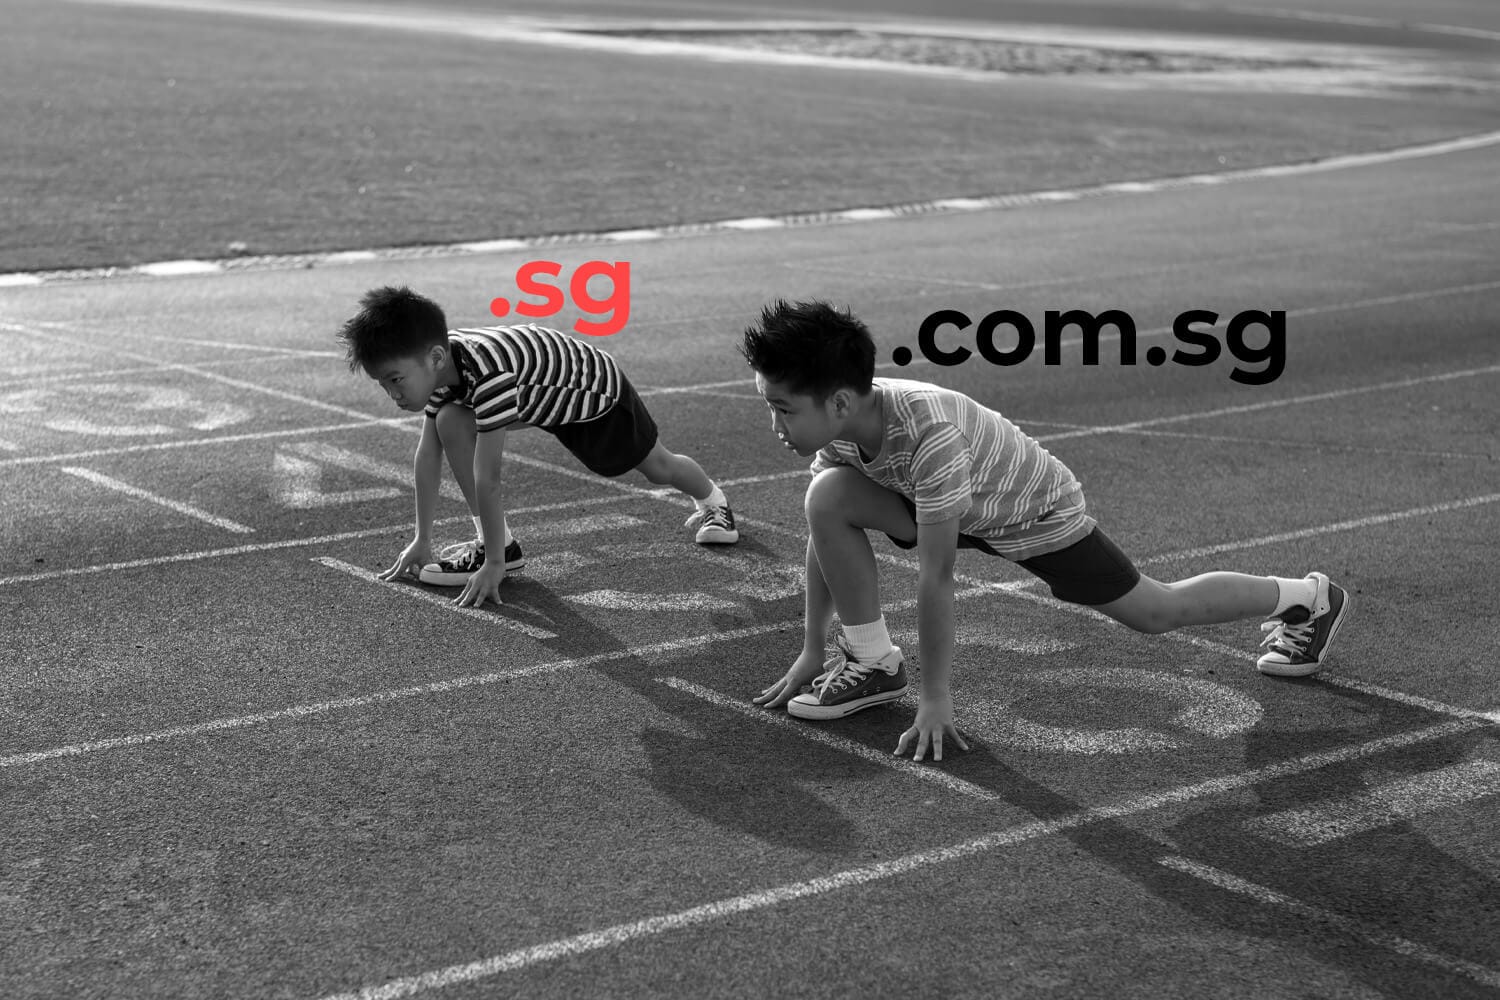 .sg vs .com.sg: Which Singapore Domain Is Better? 